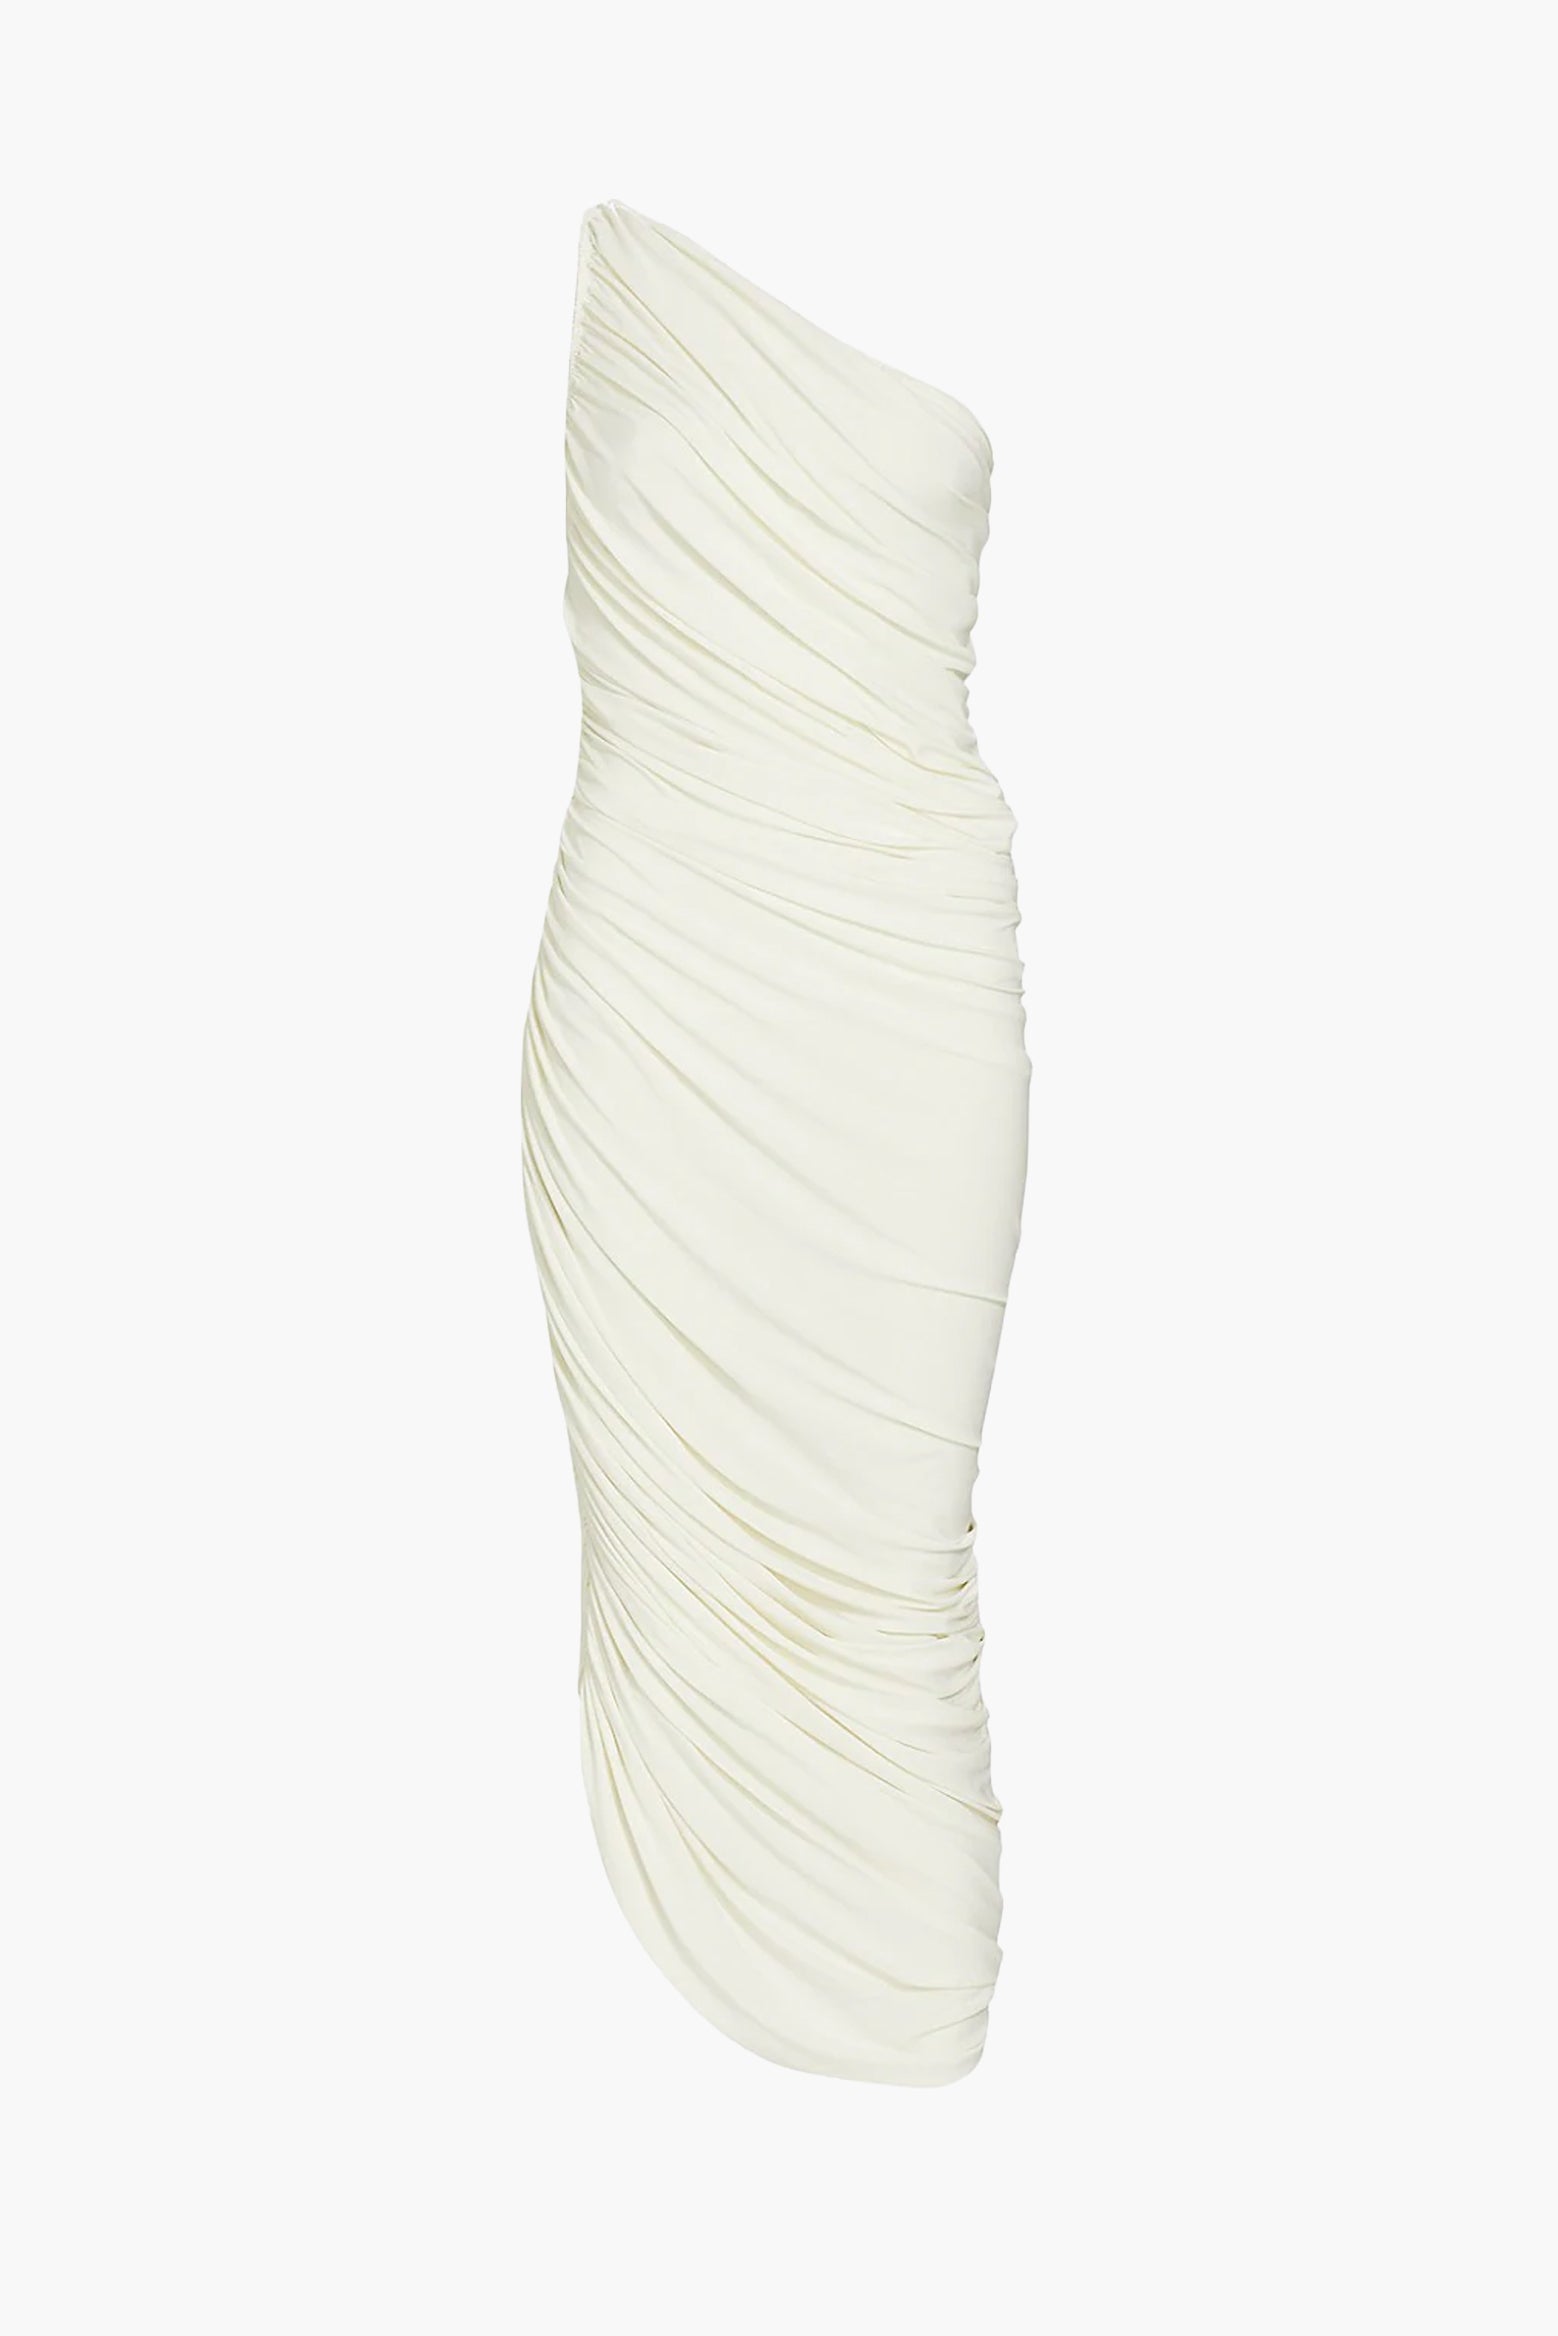 Norma Kamali Diana Gown in Mist available at The New Trend Australia.